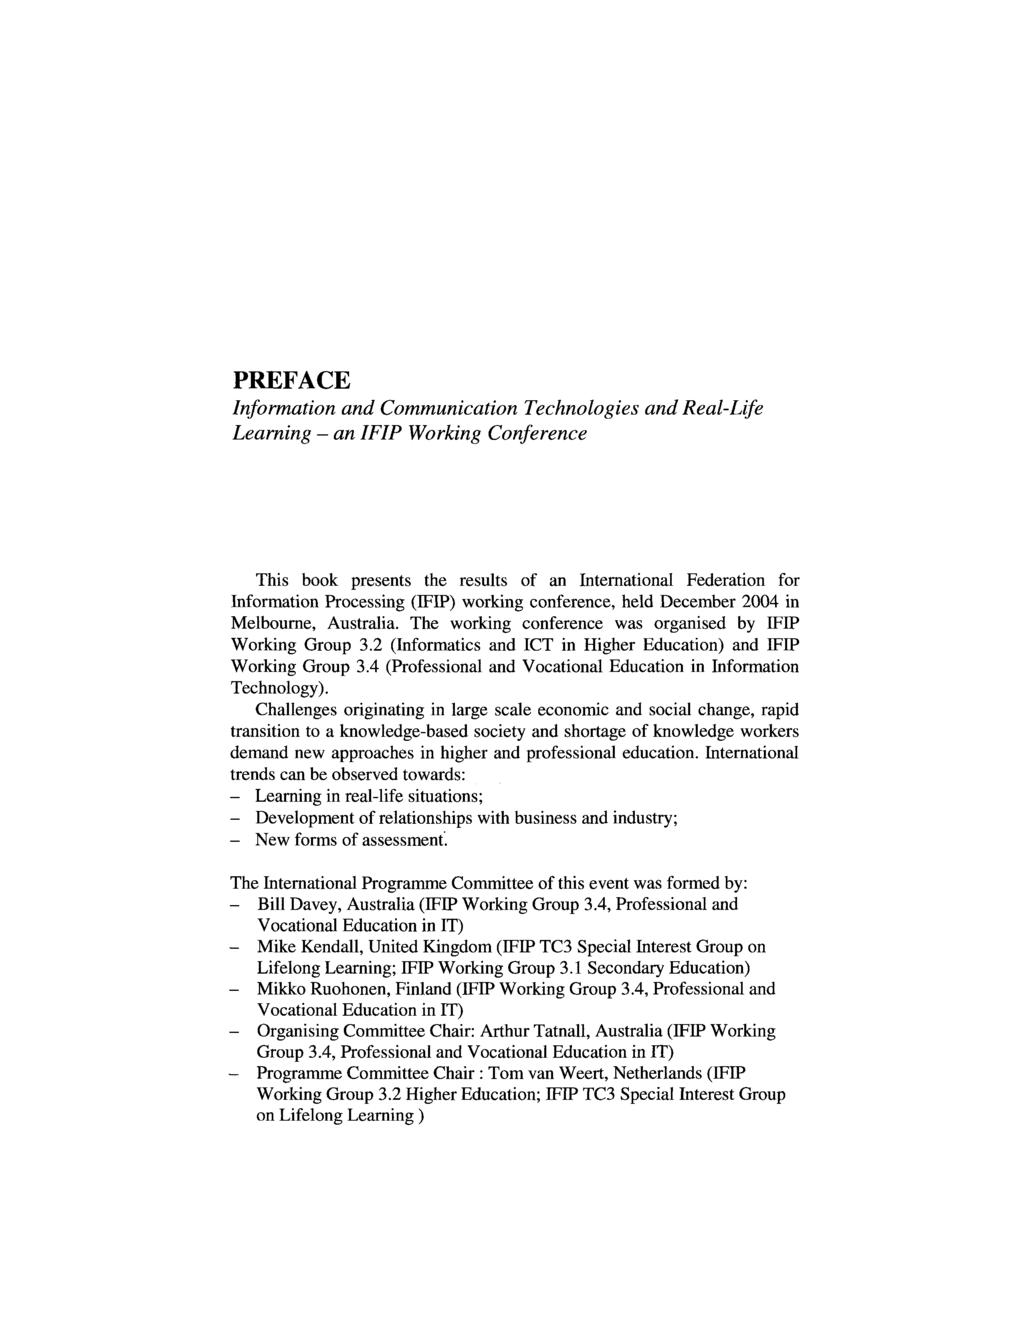 PREFACE Information and Communication Technologies and Real-Life Learning - an IFIP Working Conference This book presents the results of an International Federation for Information Processing (IFIP)